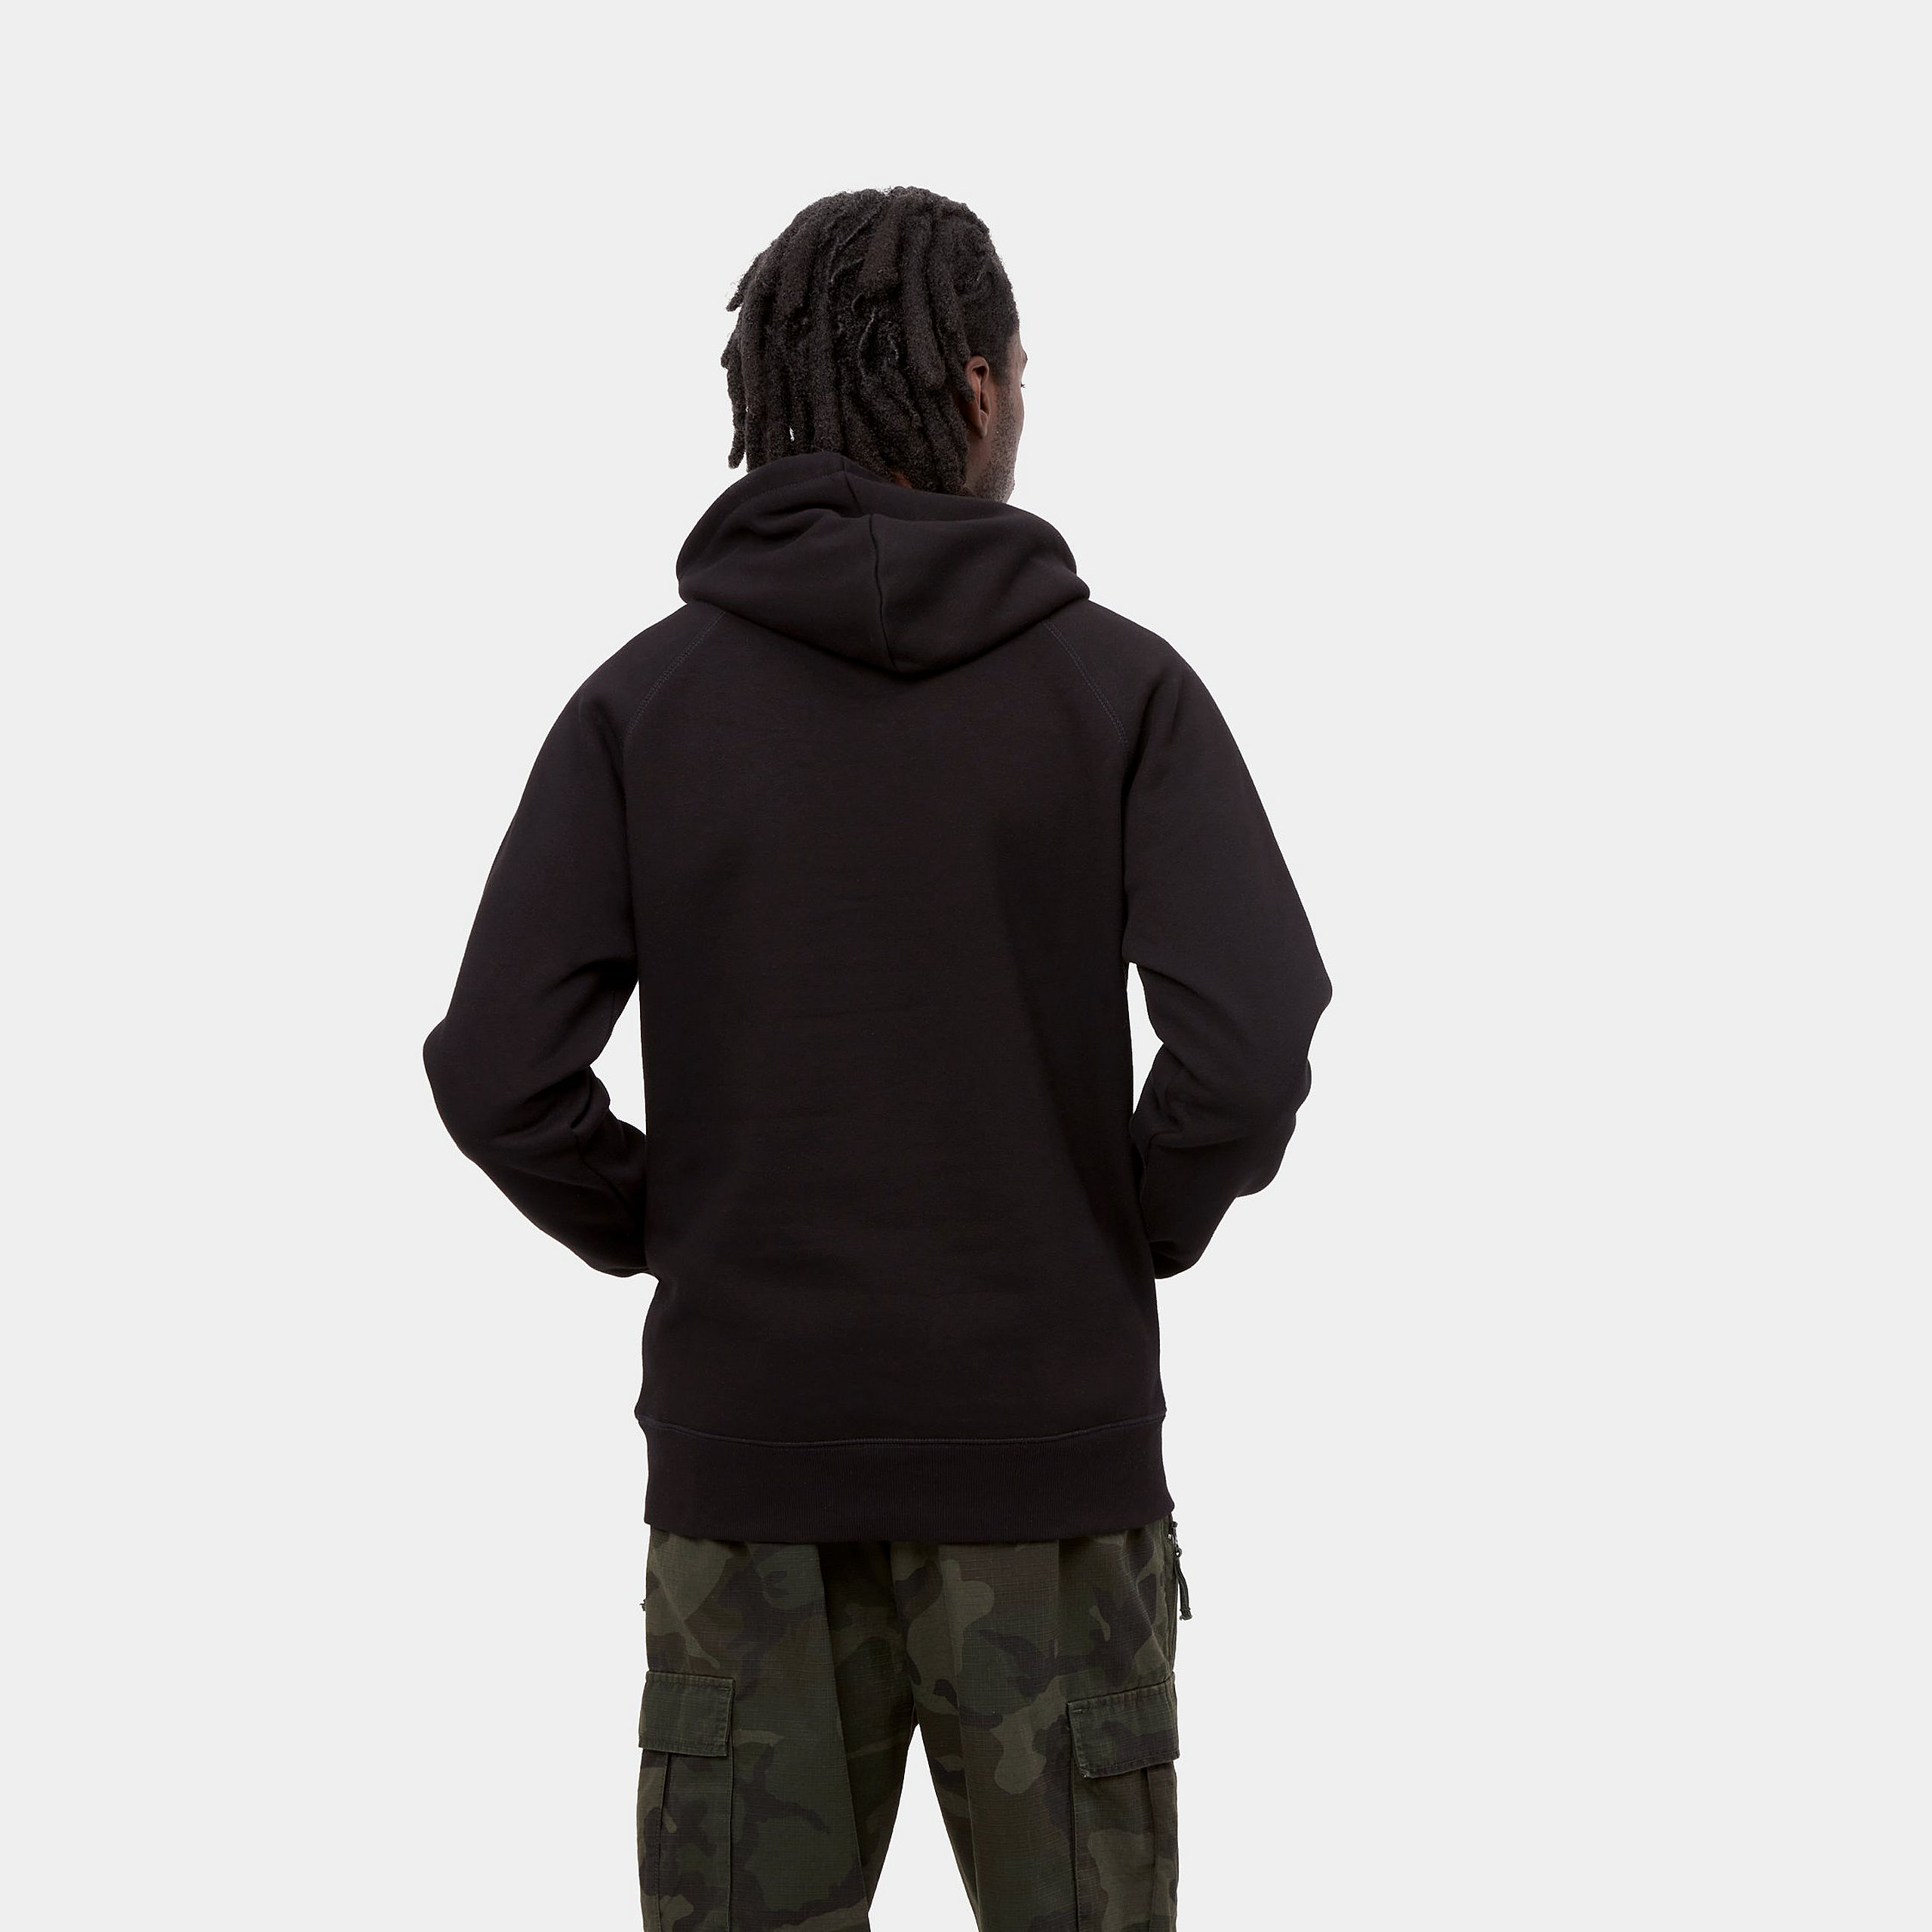 Carhartt WIP - HOODED CHASE SWEAT - Black/Gold